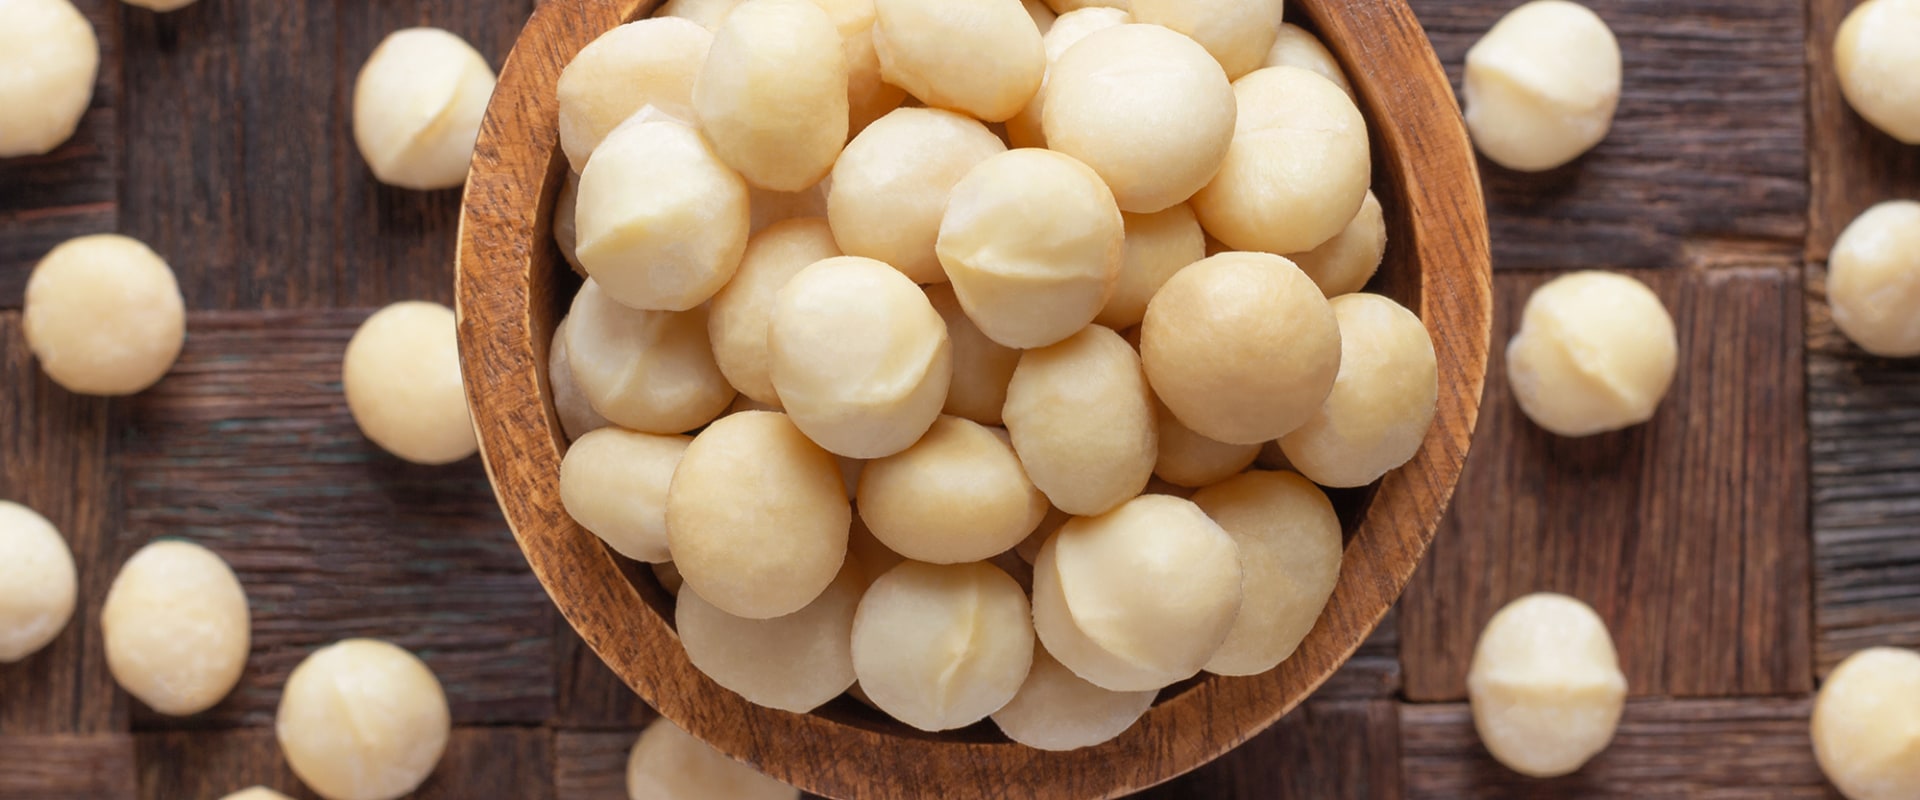 How do you know if macadamia nuts have gone bad?